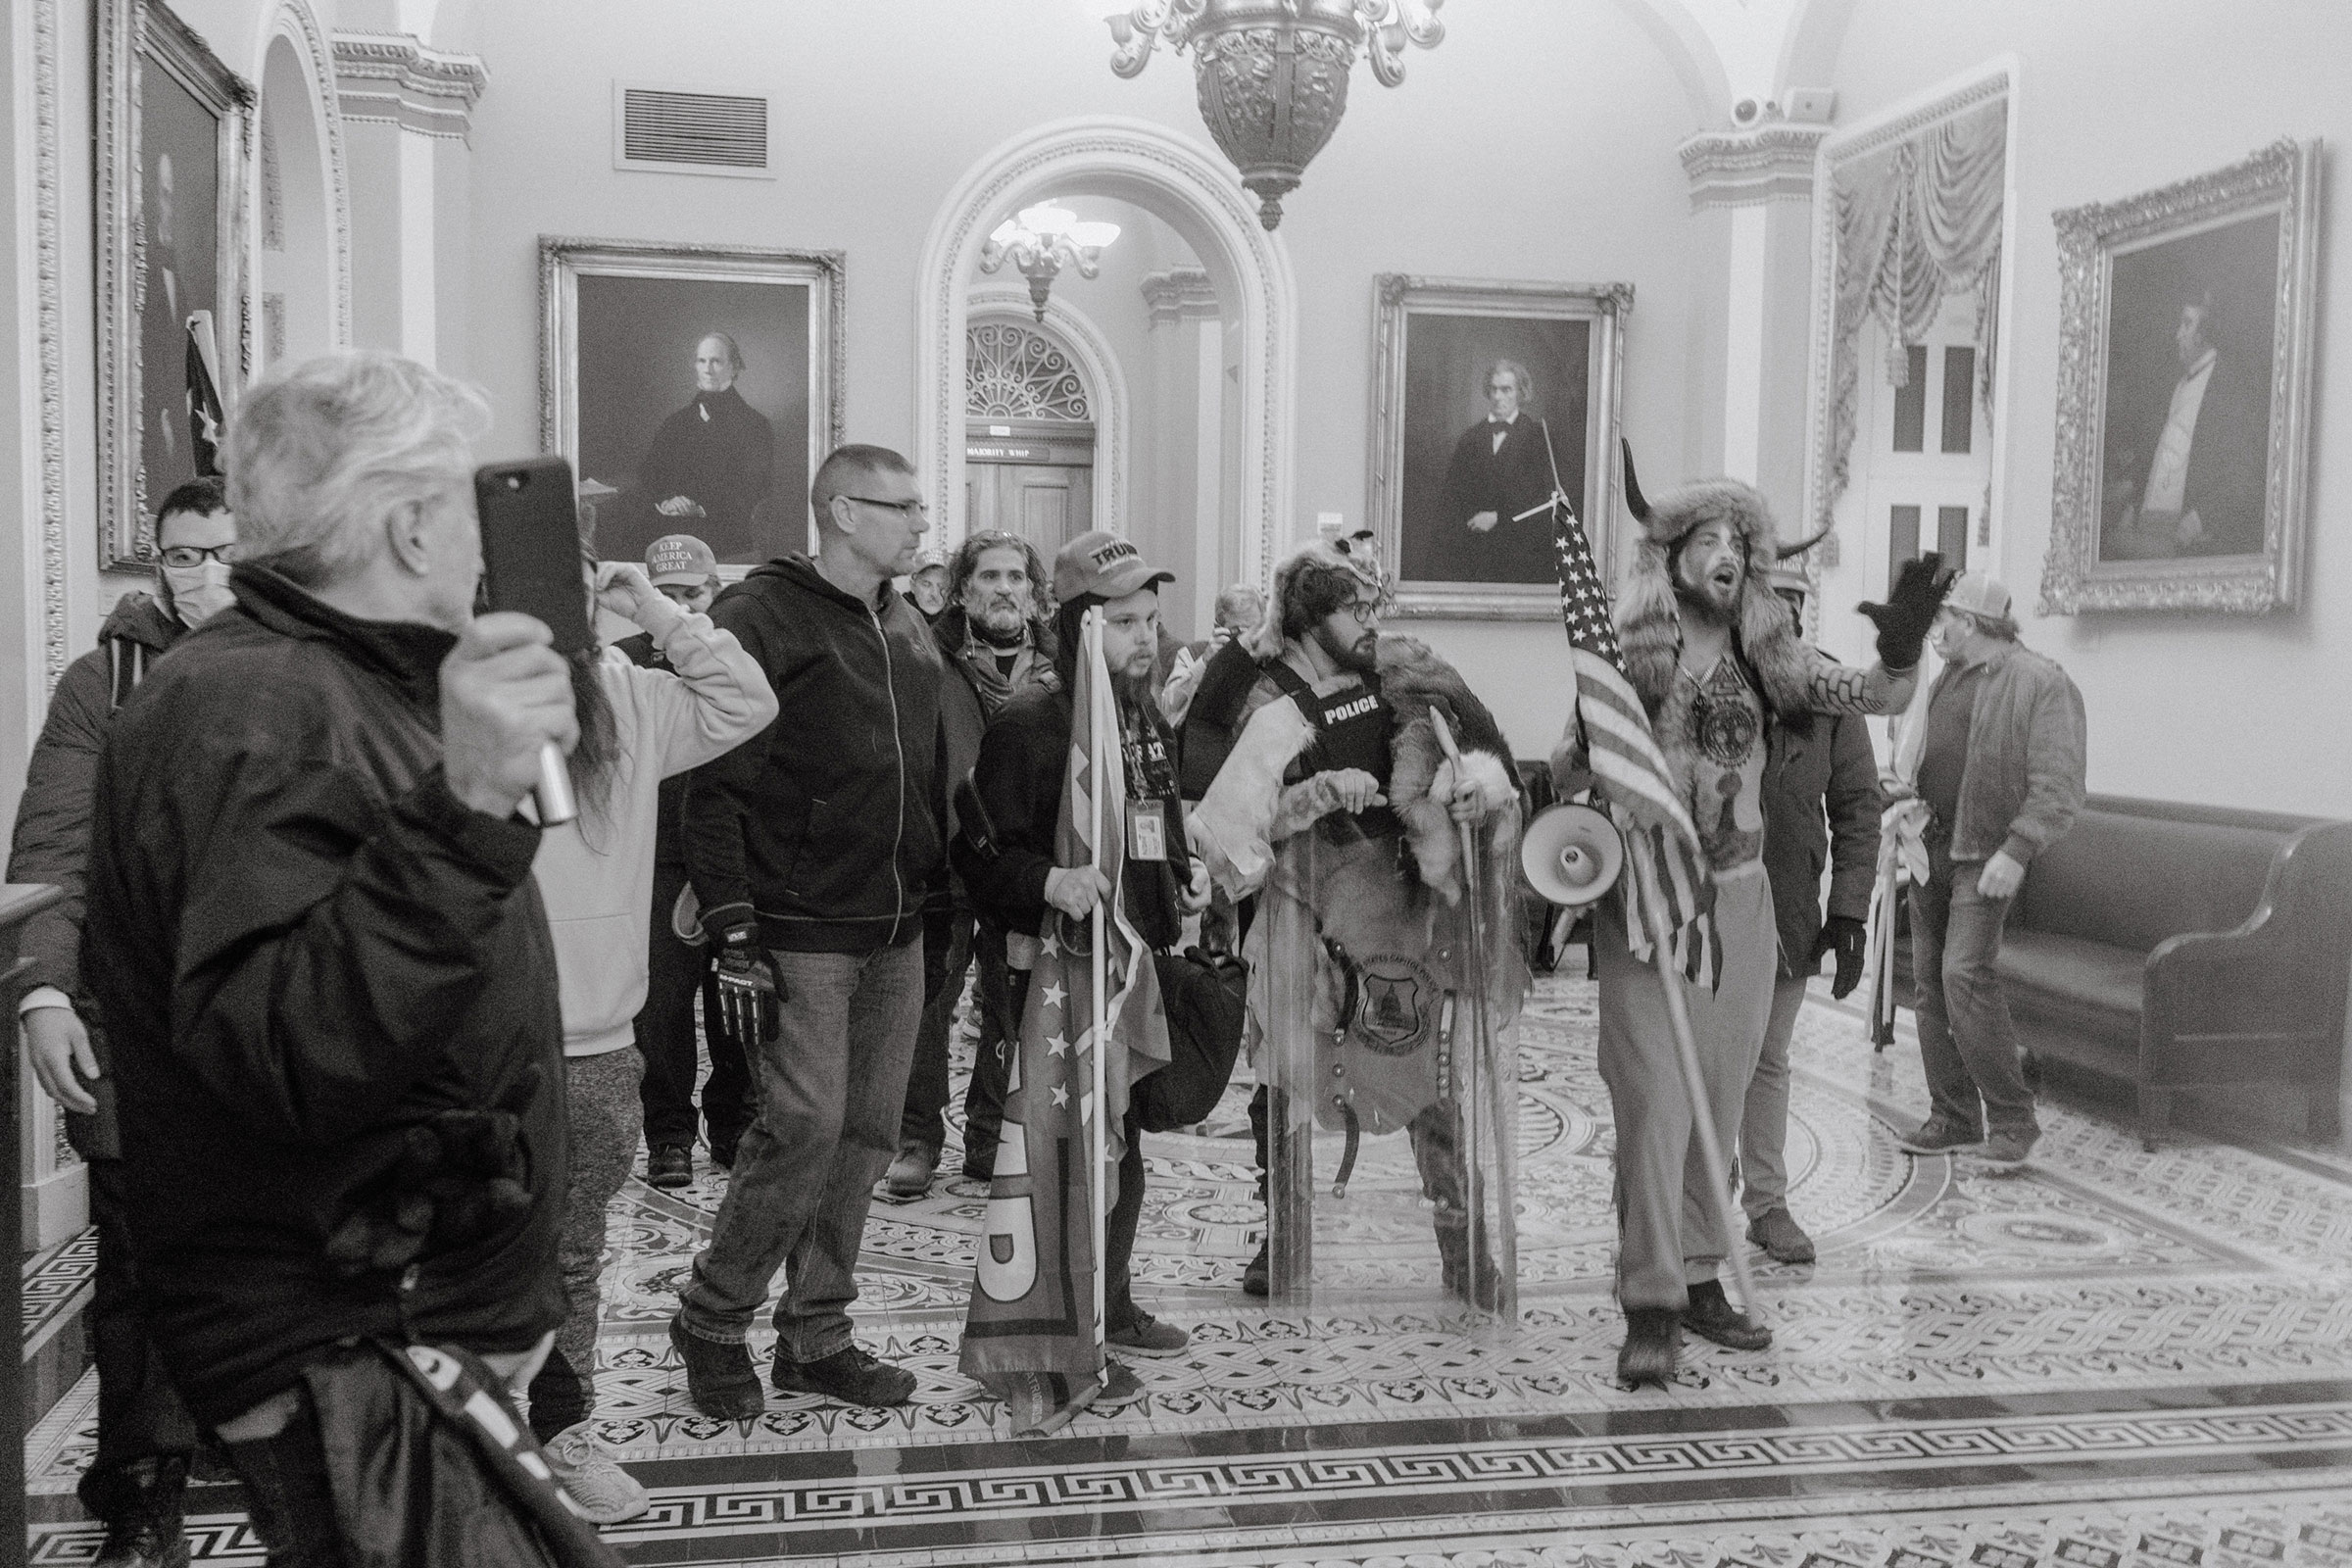 Pro-Trump rioters seen inside the Capitol on Jan. 6. (Christopher Lee for TIME)